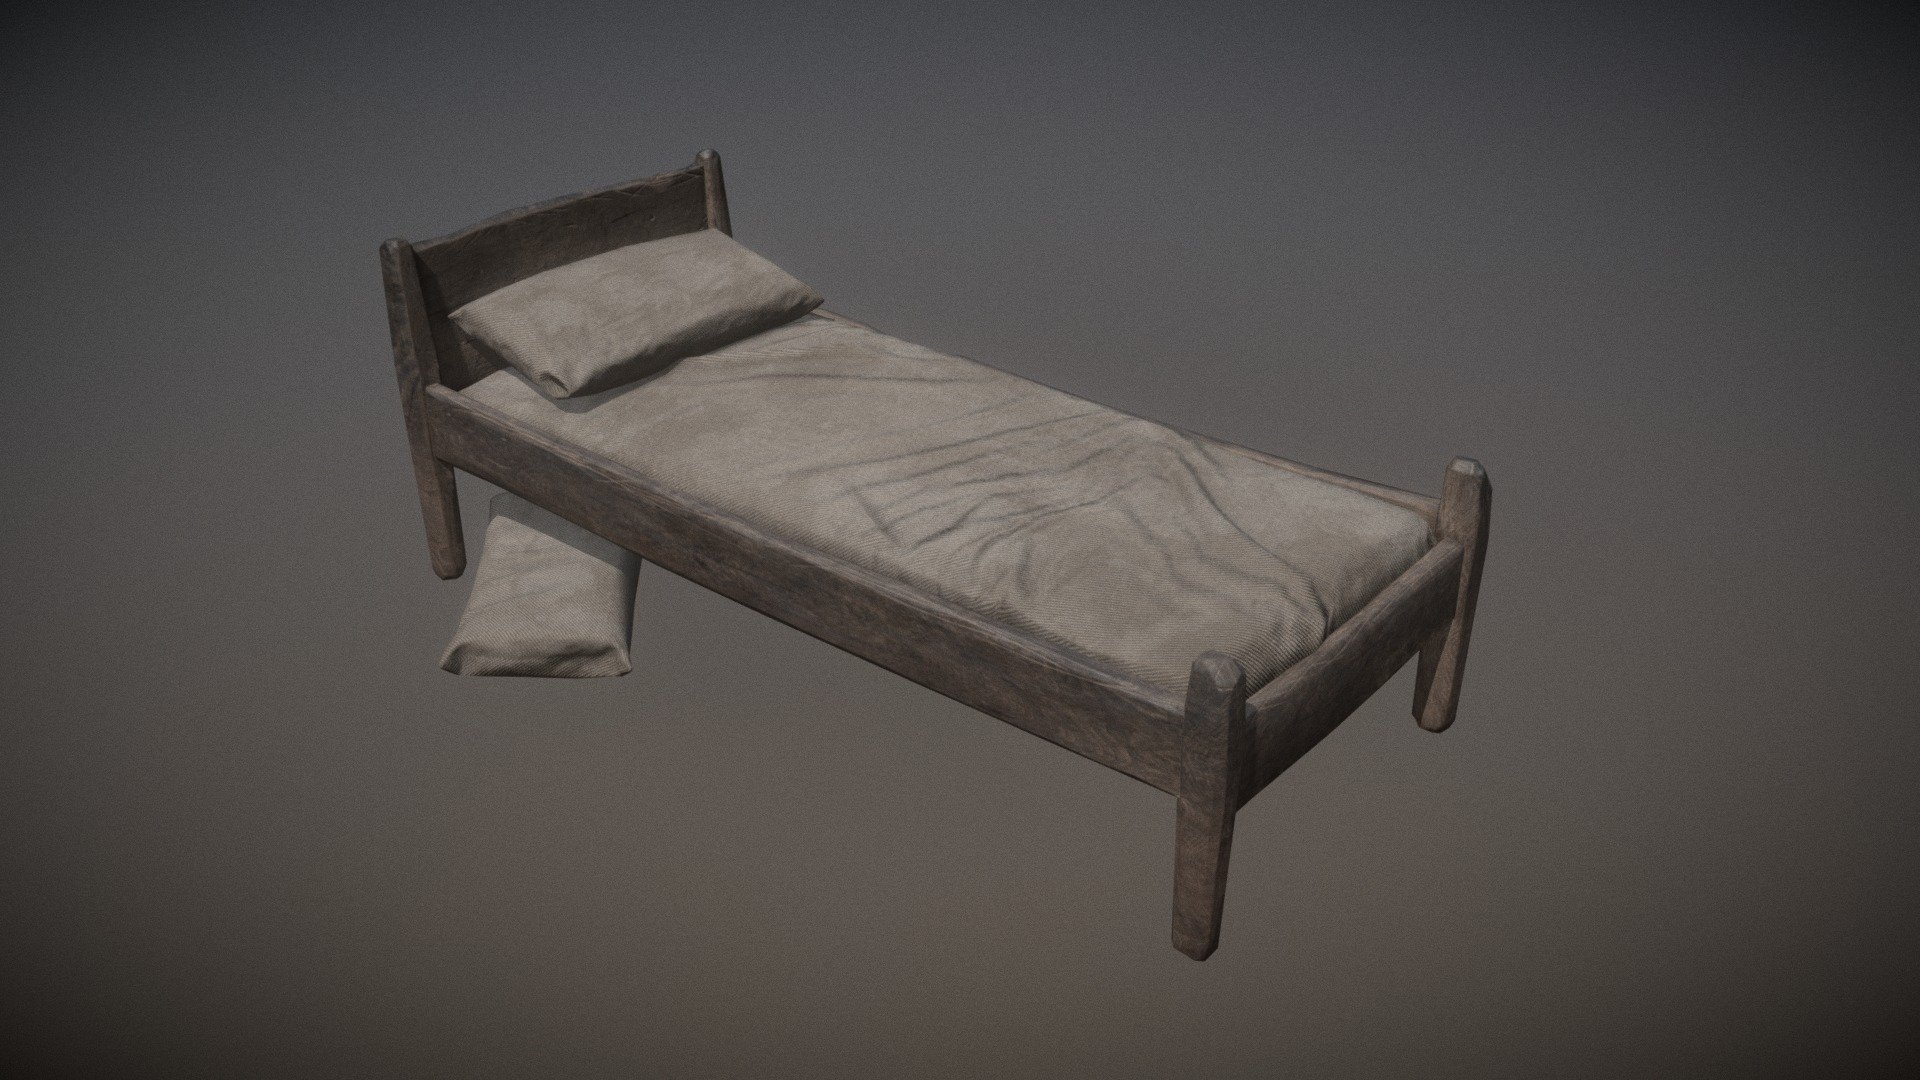 An old bed plus a pillow, separate models and texture sets.

LODs done by hand @50% increments

Part of the “Old Tavern” set - https://goo.gl/KuknSf Part of the “Old” series - https://goo.gl/XWypwo - Old Bed + Pillow - Buy Royalty Free 3D model by inedible.red (@inediblered) 3d model